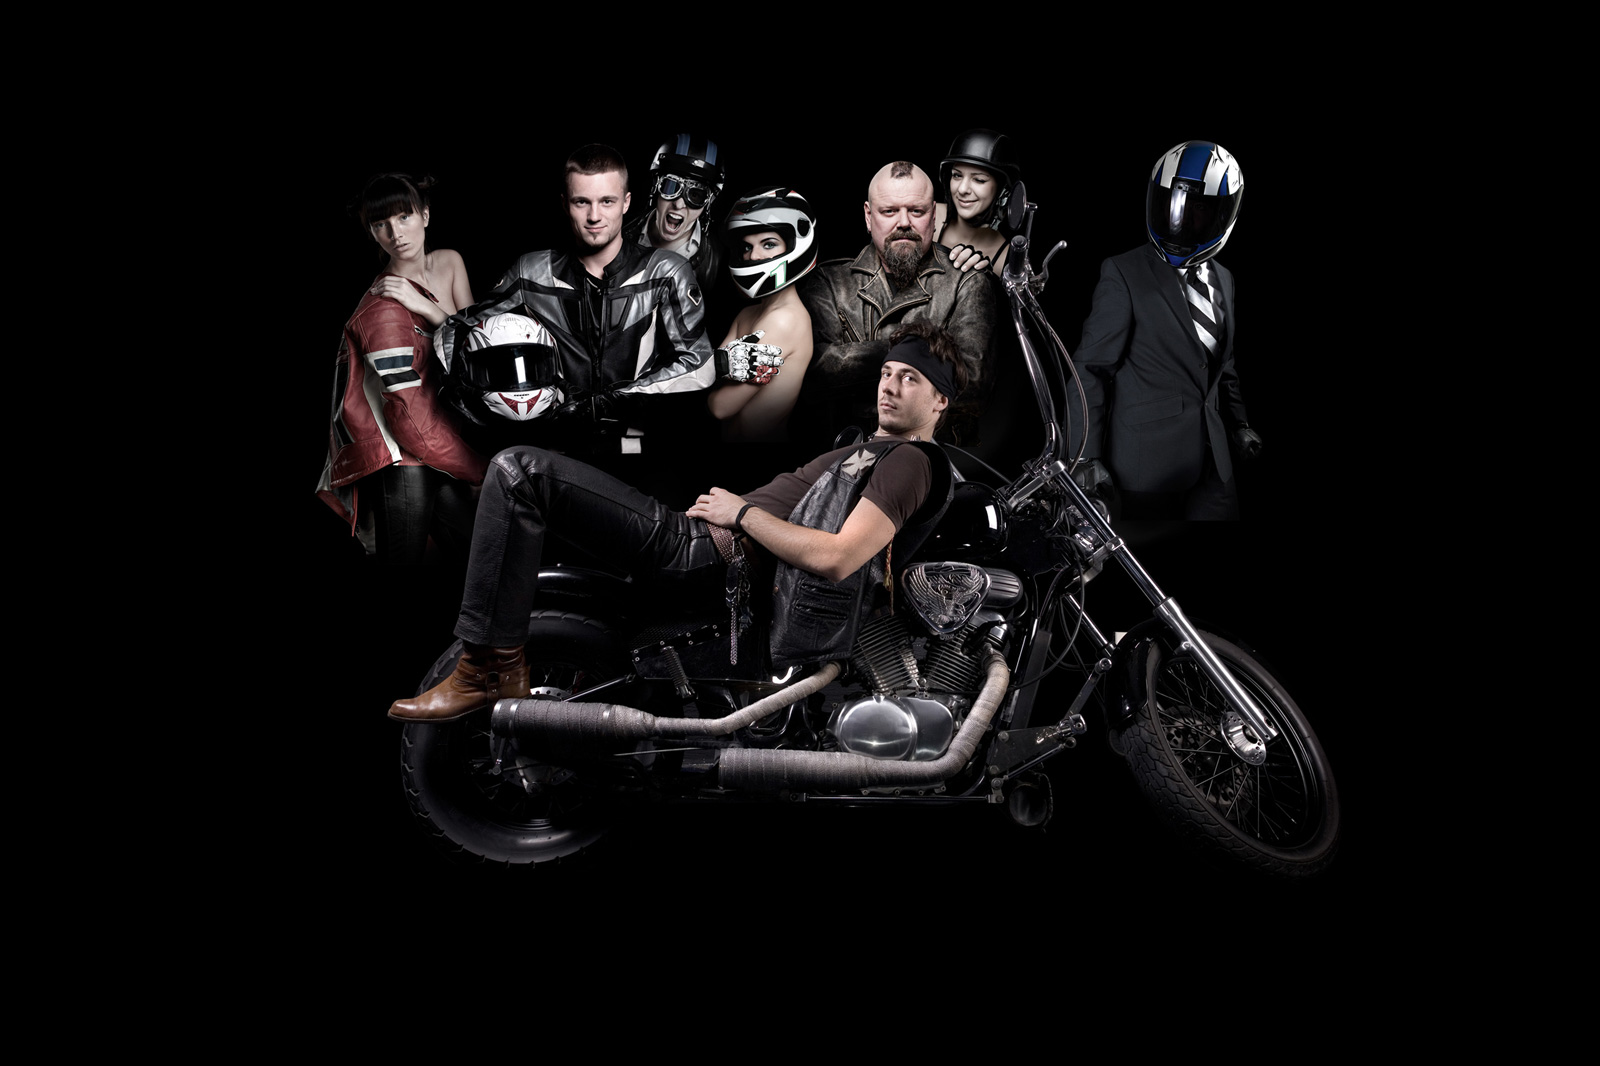 Image manipulation - bikers campaign 1 collage